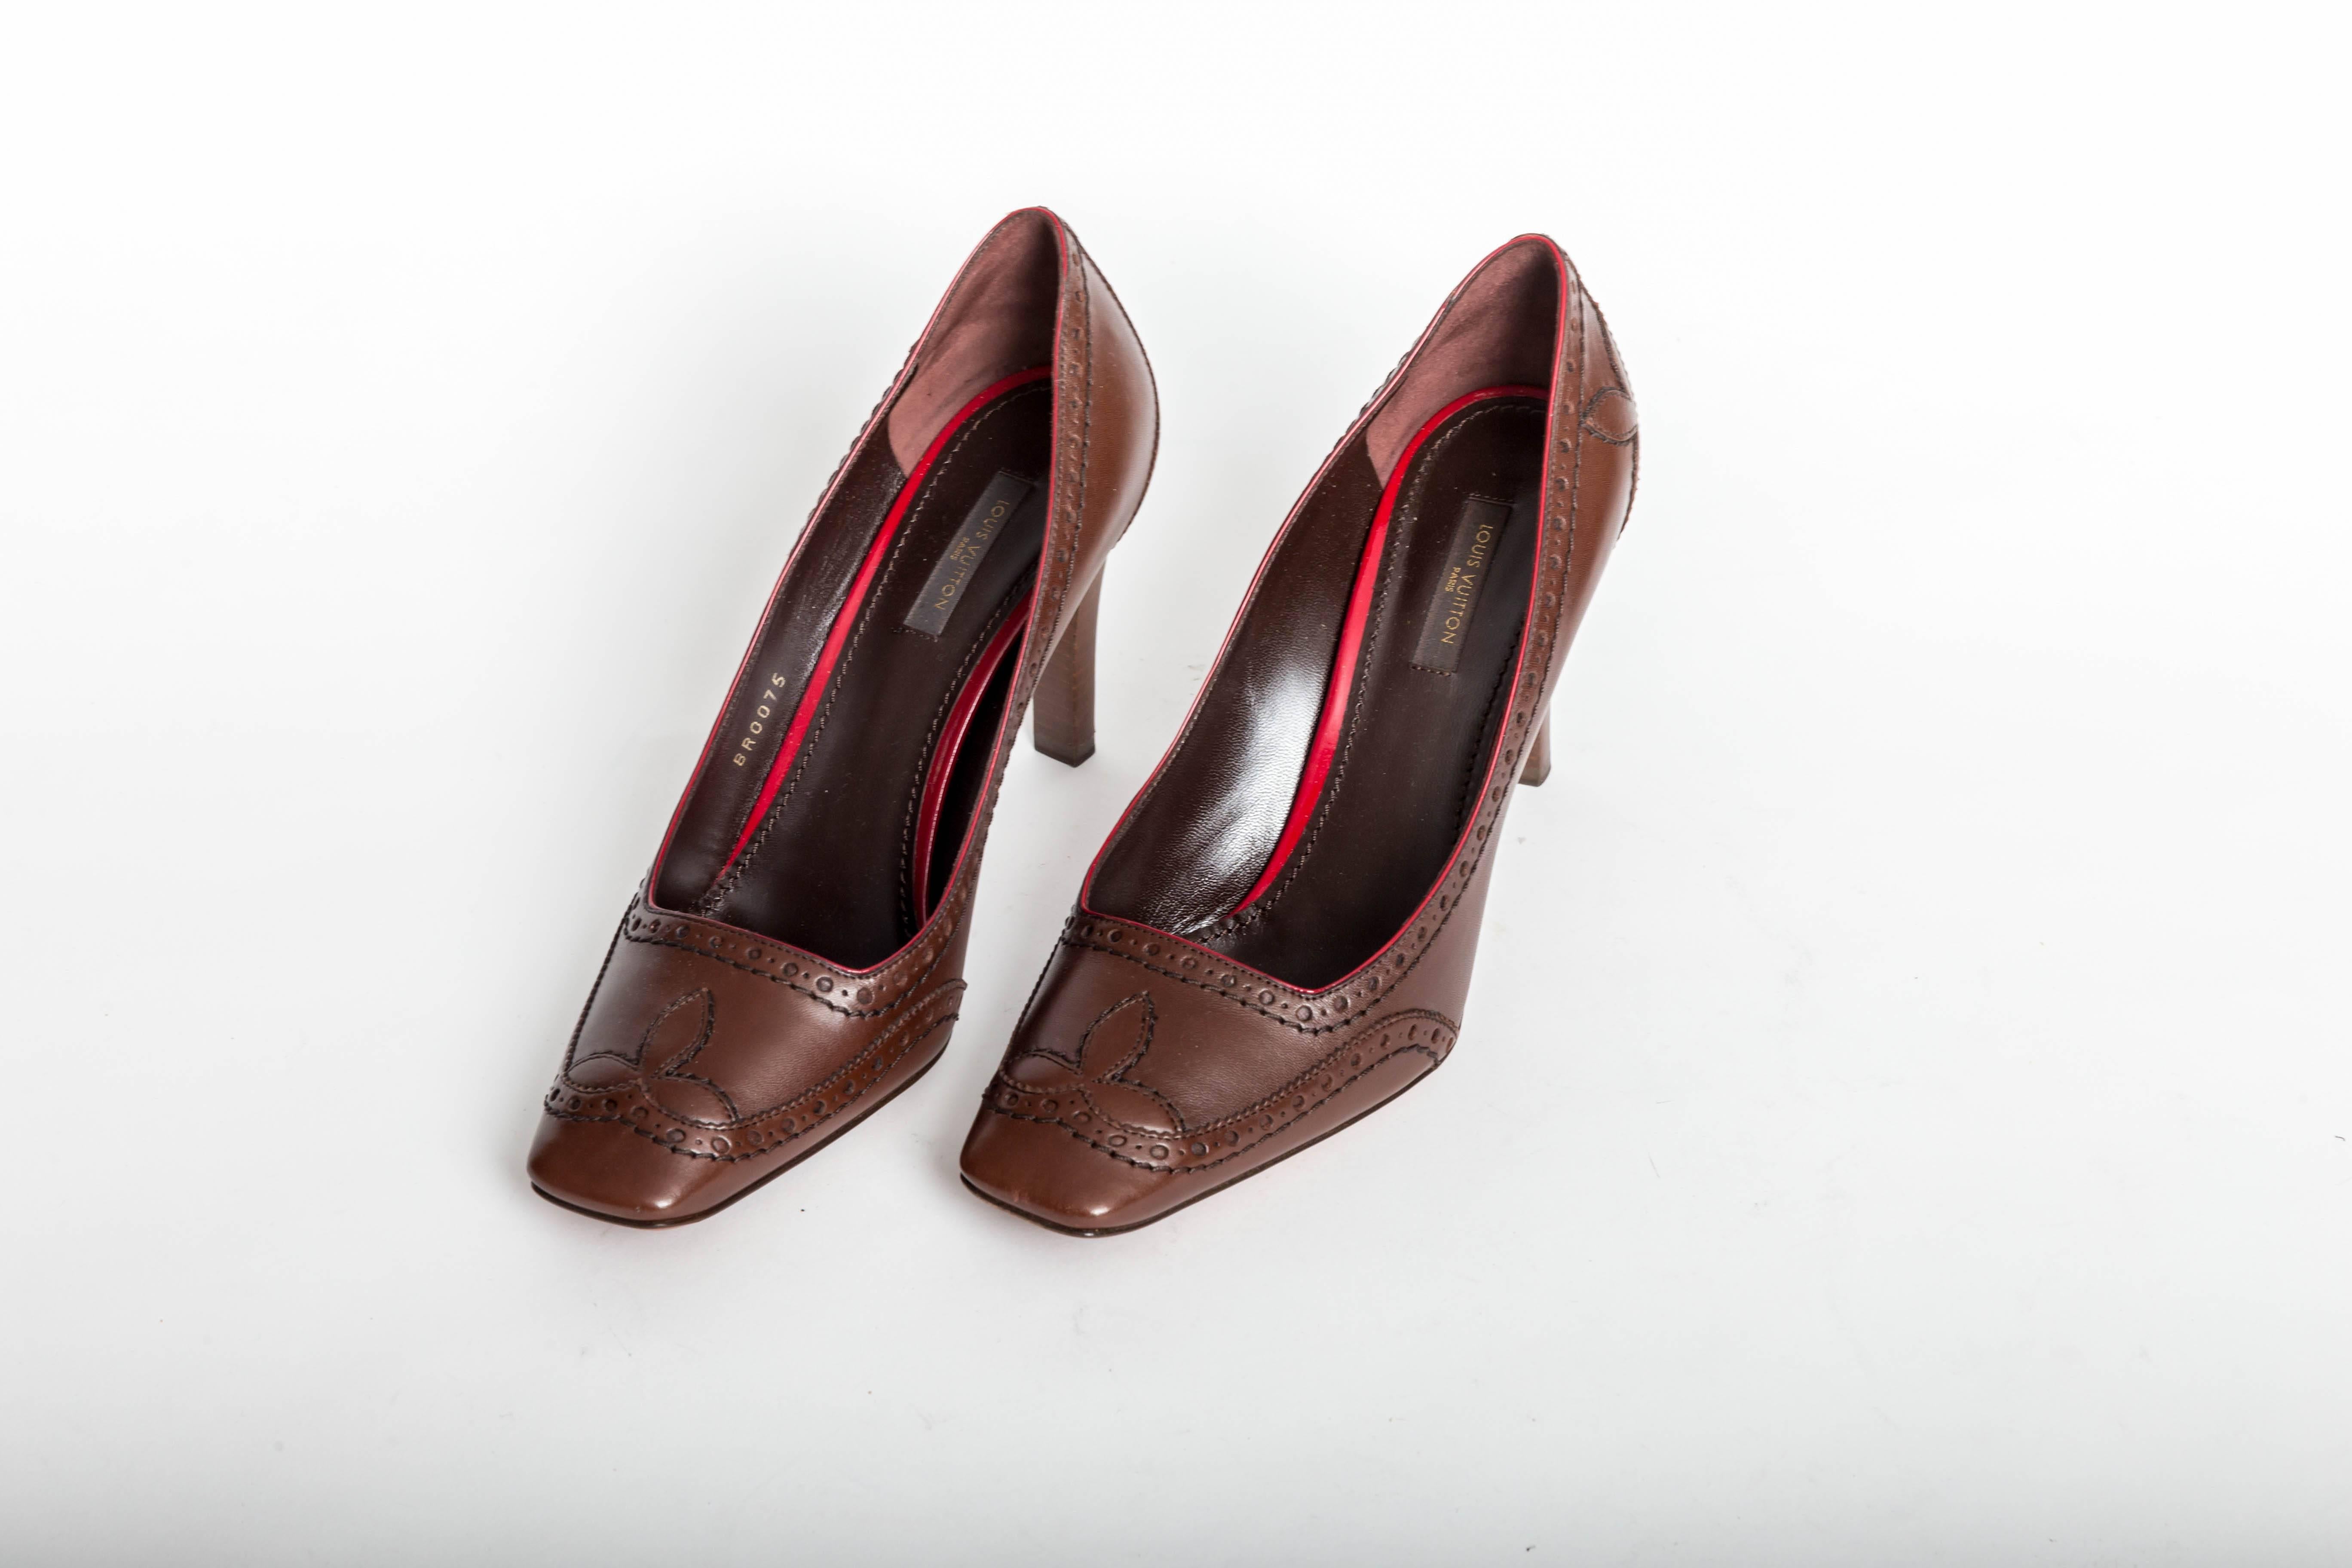 Timeless Vintage Louis Vuitton Pumps in Brown Leather 
Heel height 3 3/4 inches
Square toe with stitched leather detail 

